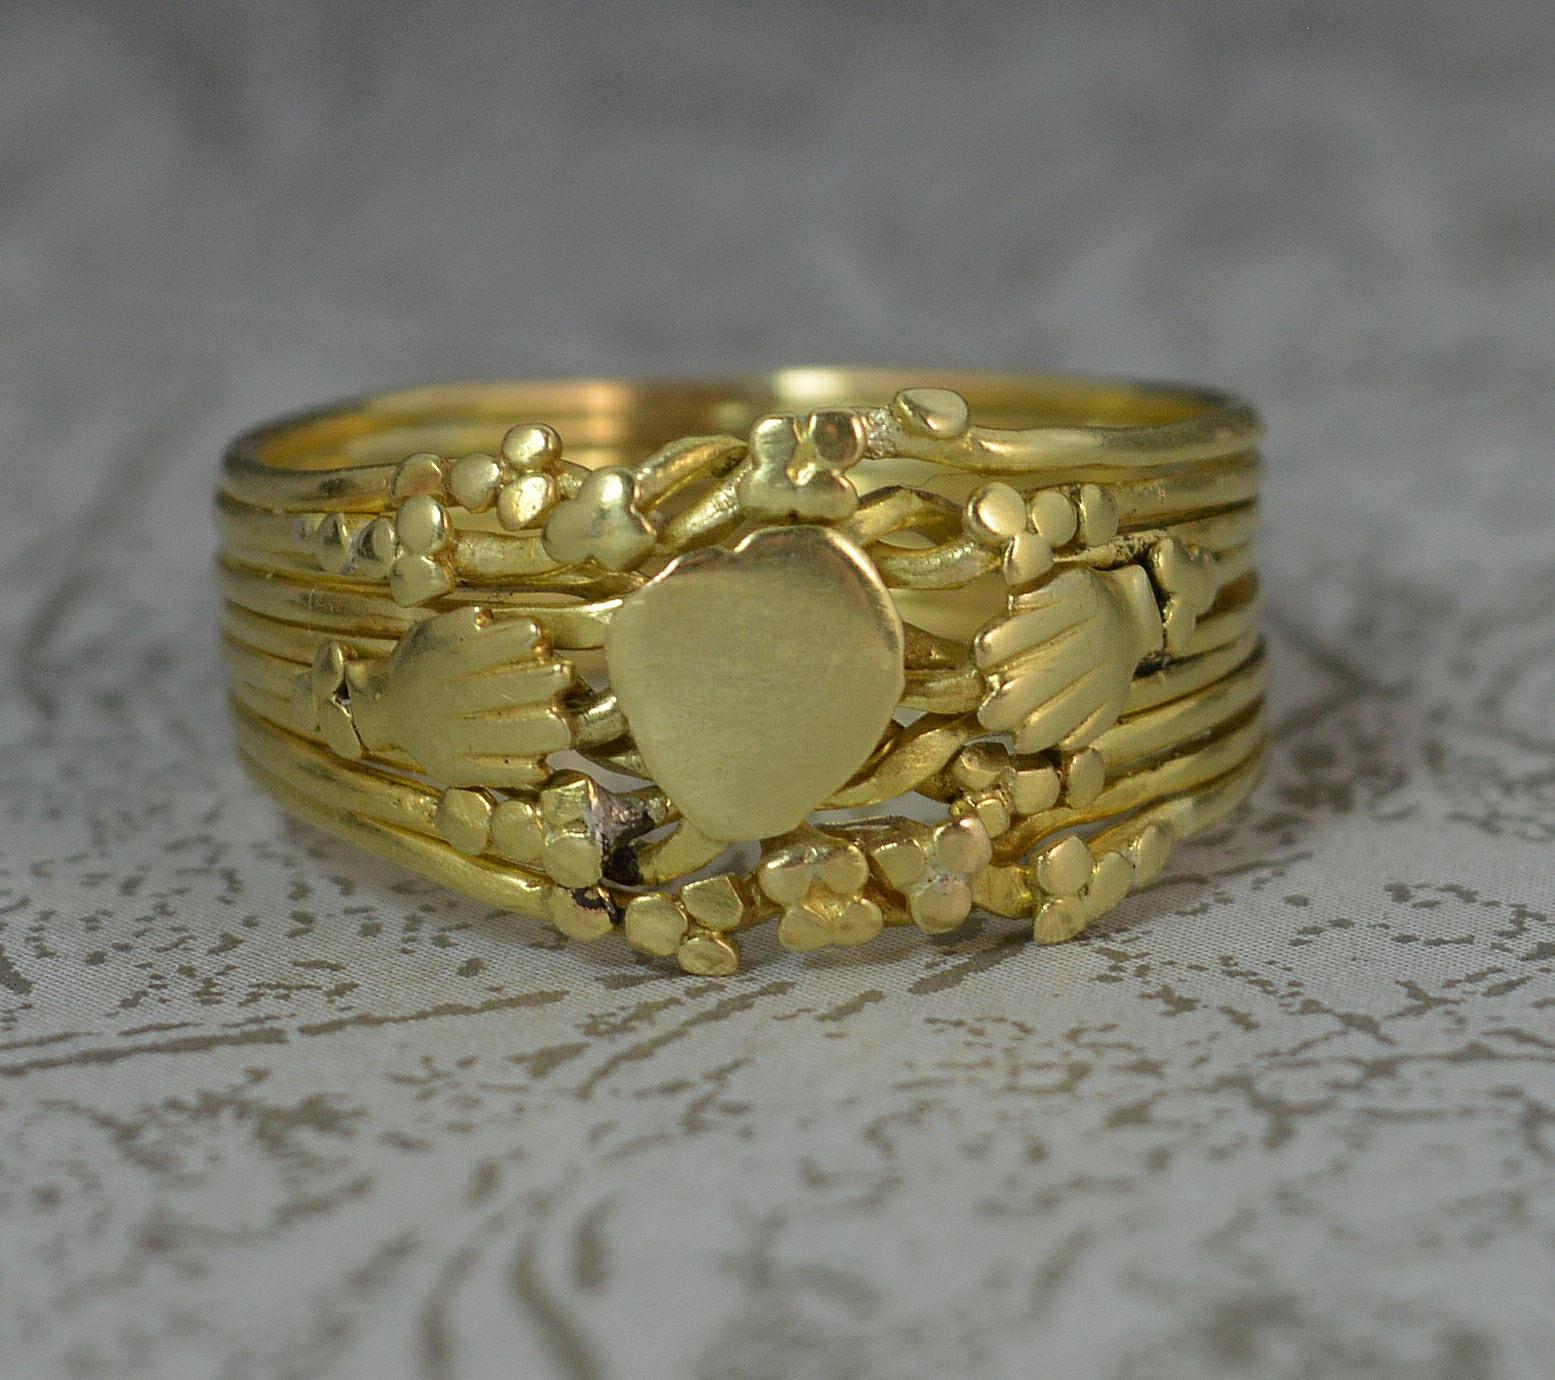 A superb true mid Georgian era Fede band ring, c1760.
18 carat yellow gold example.
Designed as nine bands creating a puzzle ring design. The cluster depicts a heart to centre with hands to each side and flower gold balls surrounding.
A fede ring is